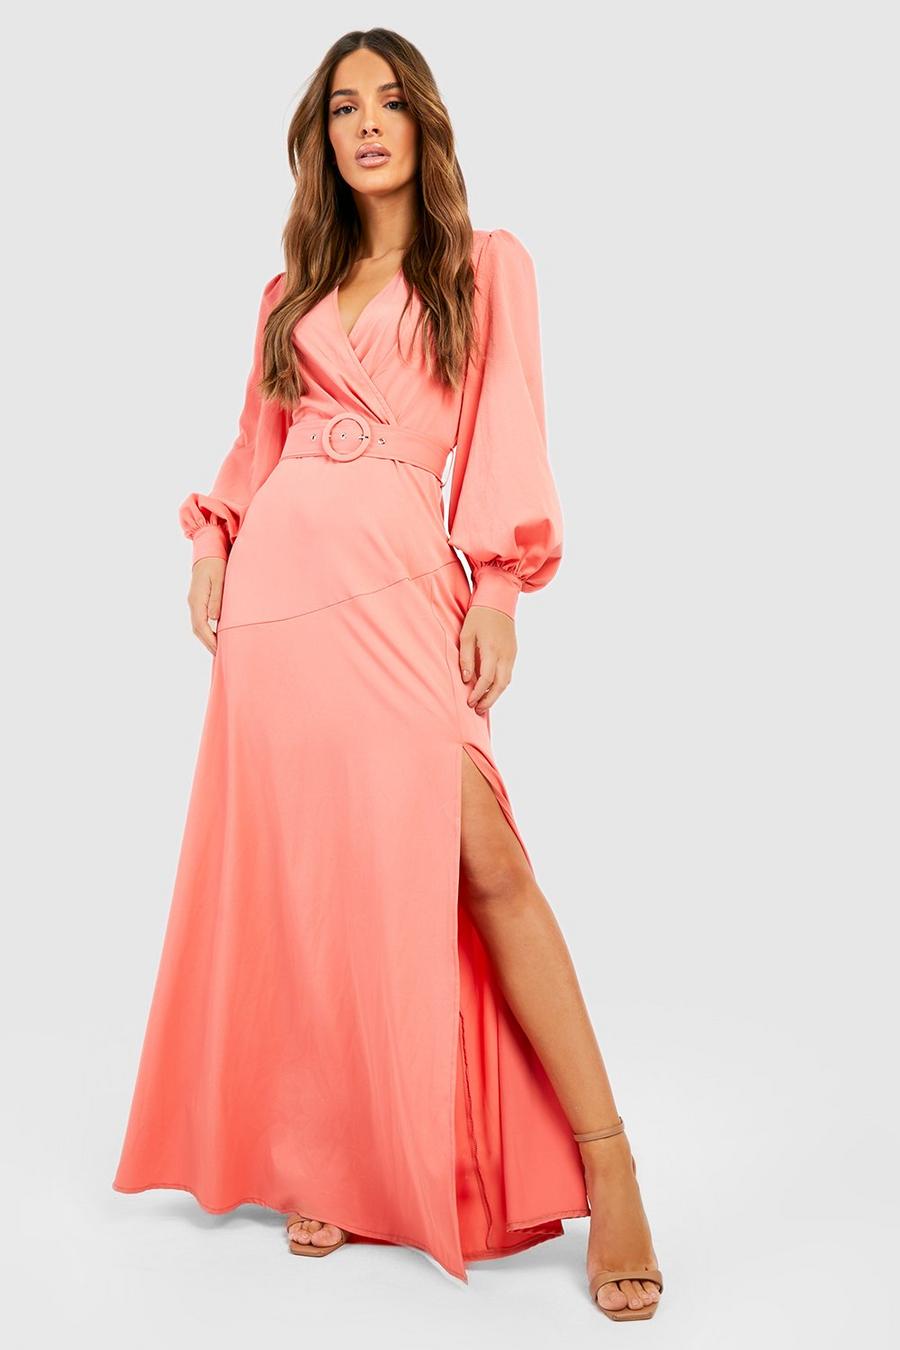 Coral pink Plunge Belted Maxi Dress